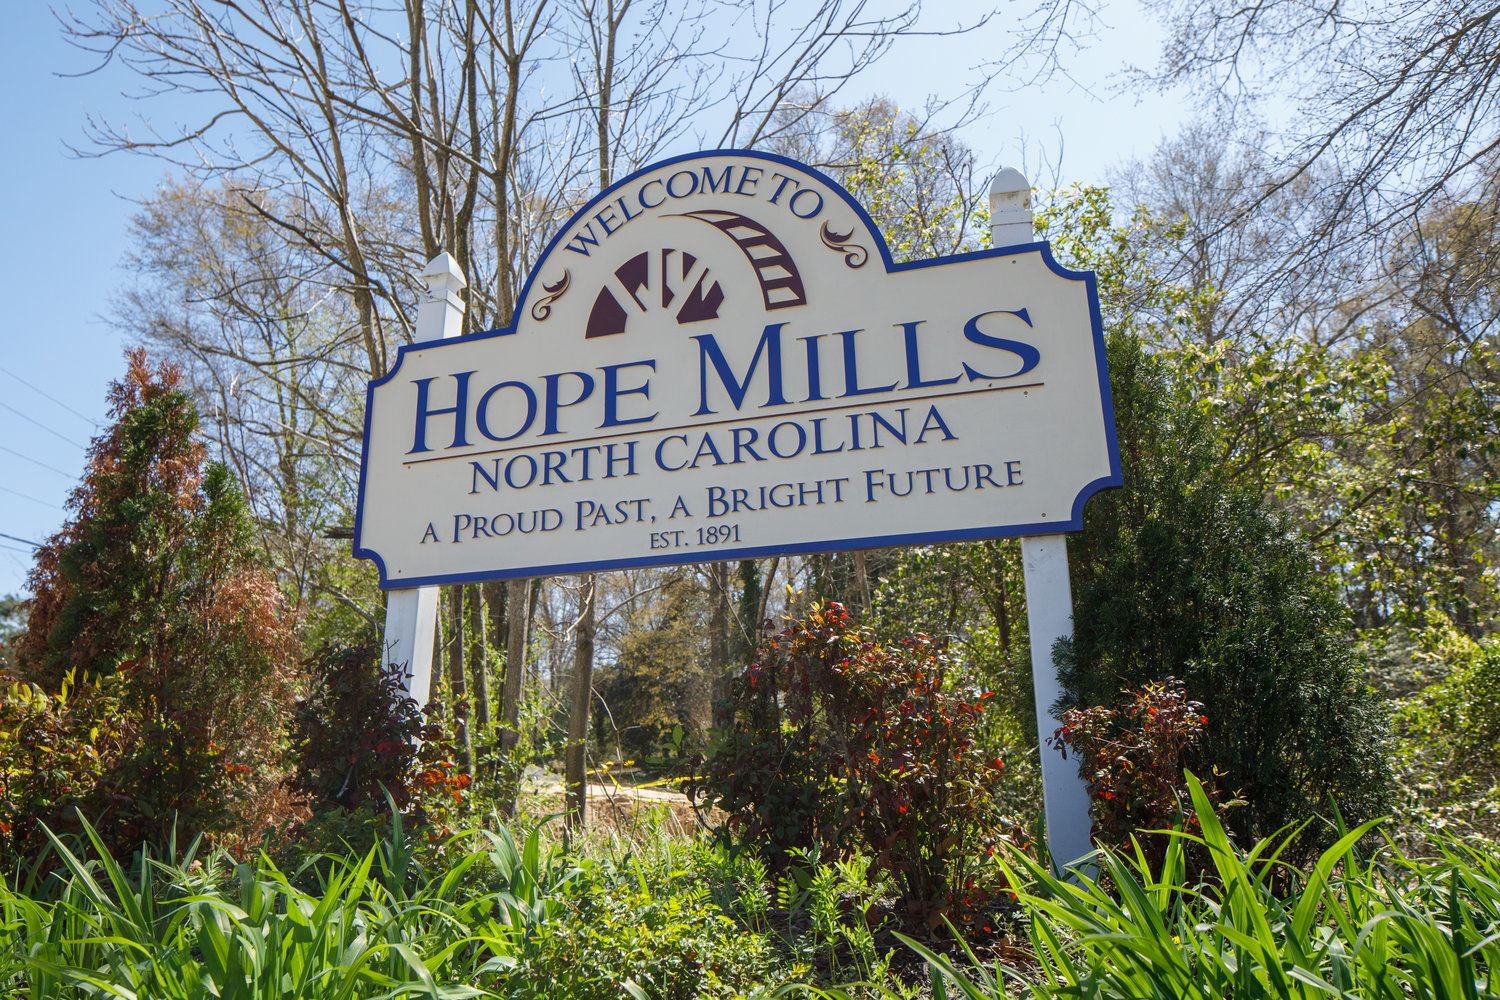 The Hope Mills Board of Commissioners on Monday is expected to receive the final report from the group working on the town’s overlay zoning initiative.